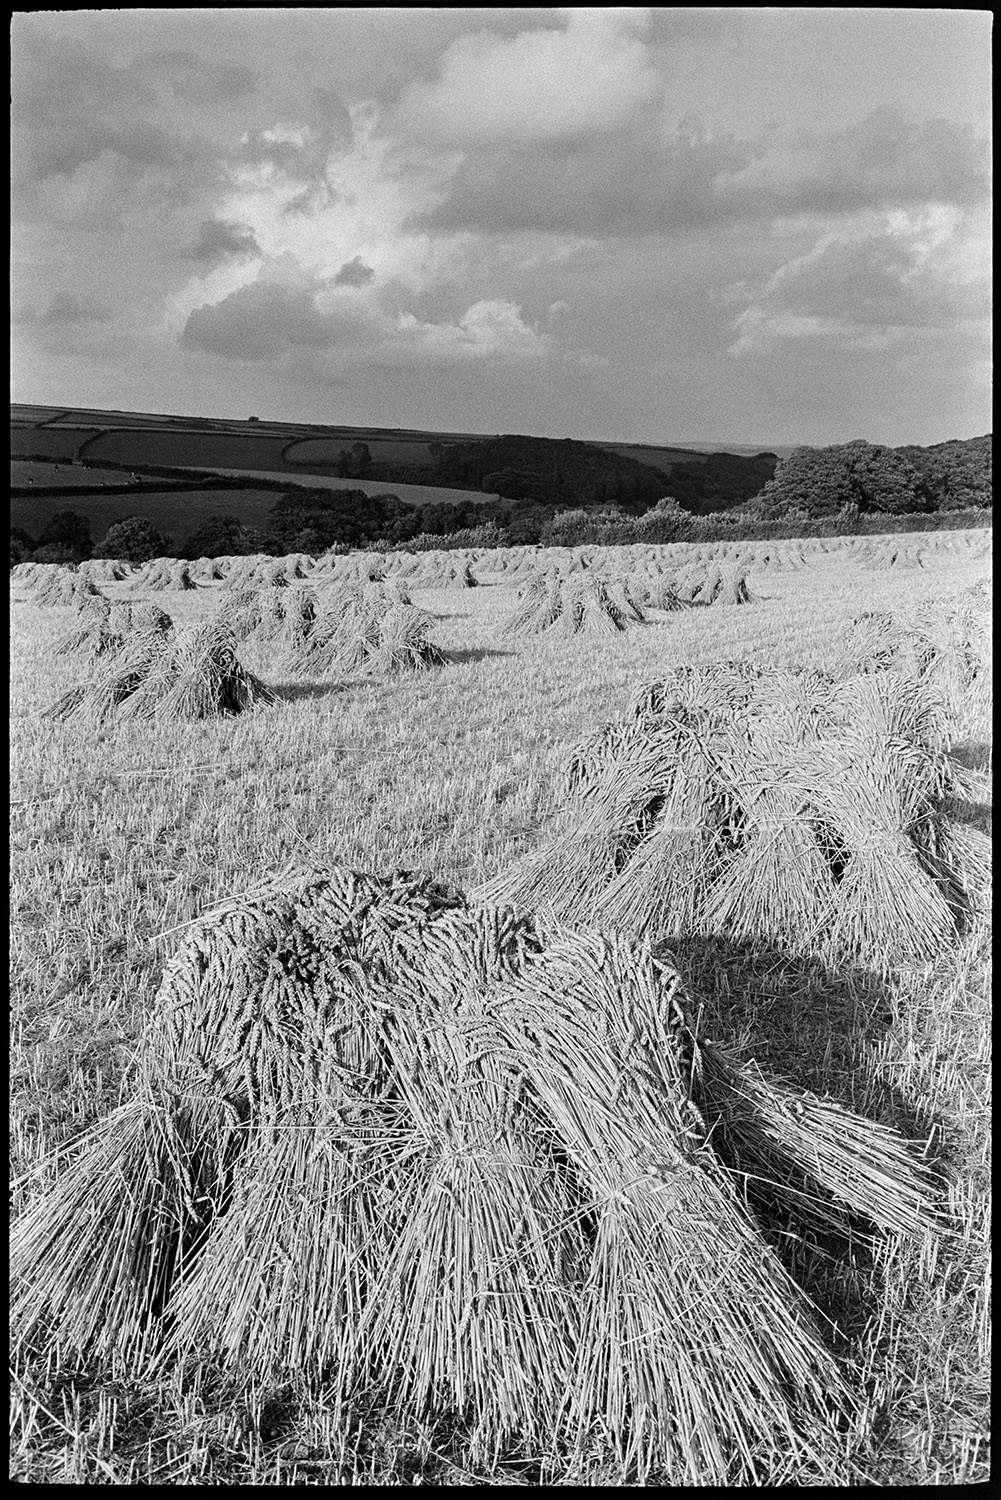 Cloudy landscape, corn stooks with shadows, rainbow. 
[Stooks of corn in a field at East Westacott, Riddlecombe. Trees, field and hedges can be seen in the background.]